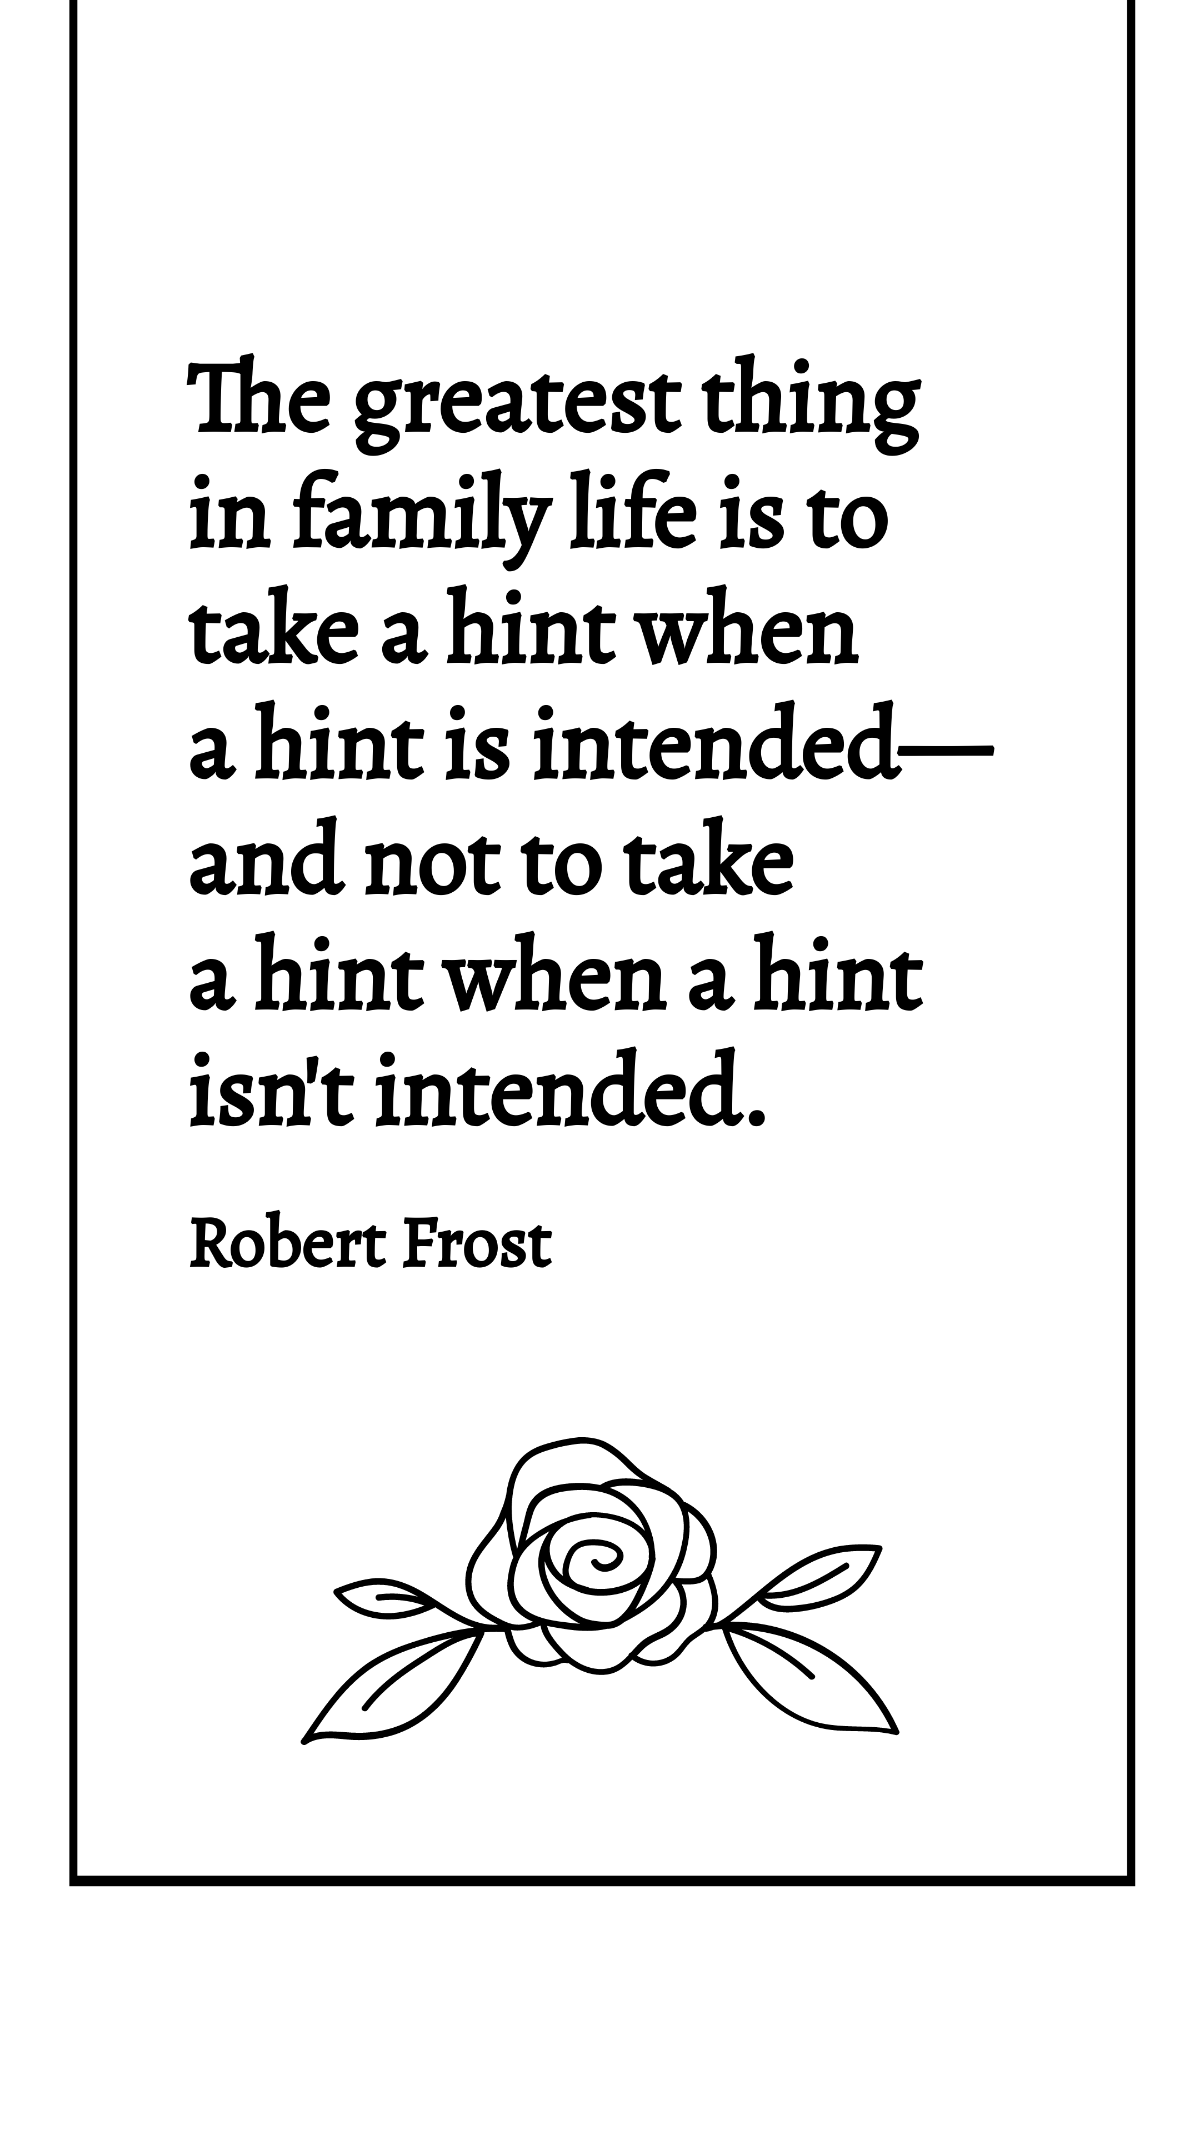 Robert Frost - The greatest thing in family life is to take a hint when a hint is intended-and not to take a hint when a hint isn't intended. Template